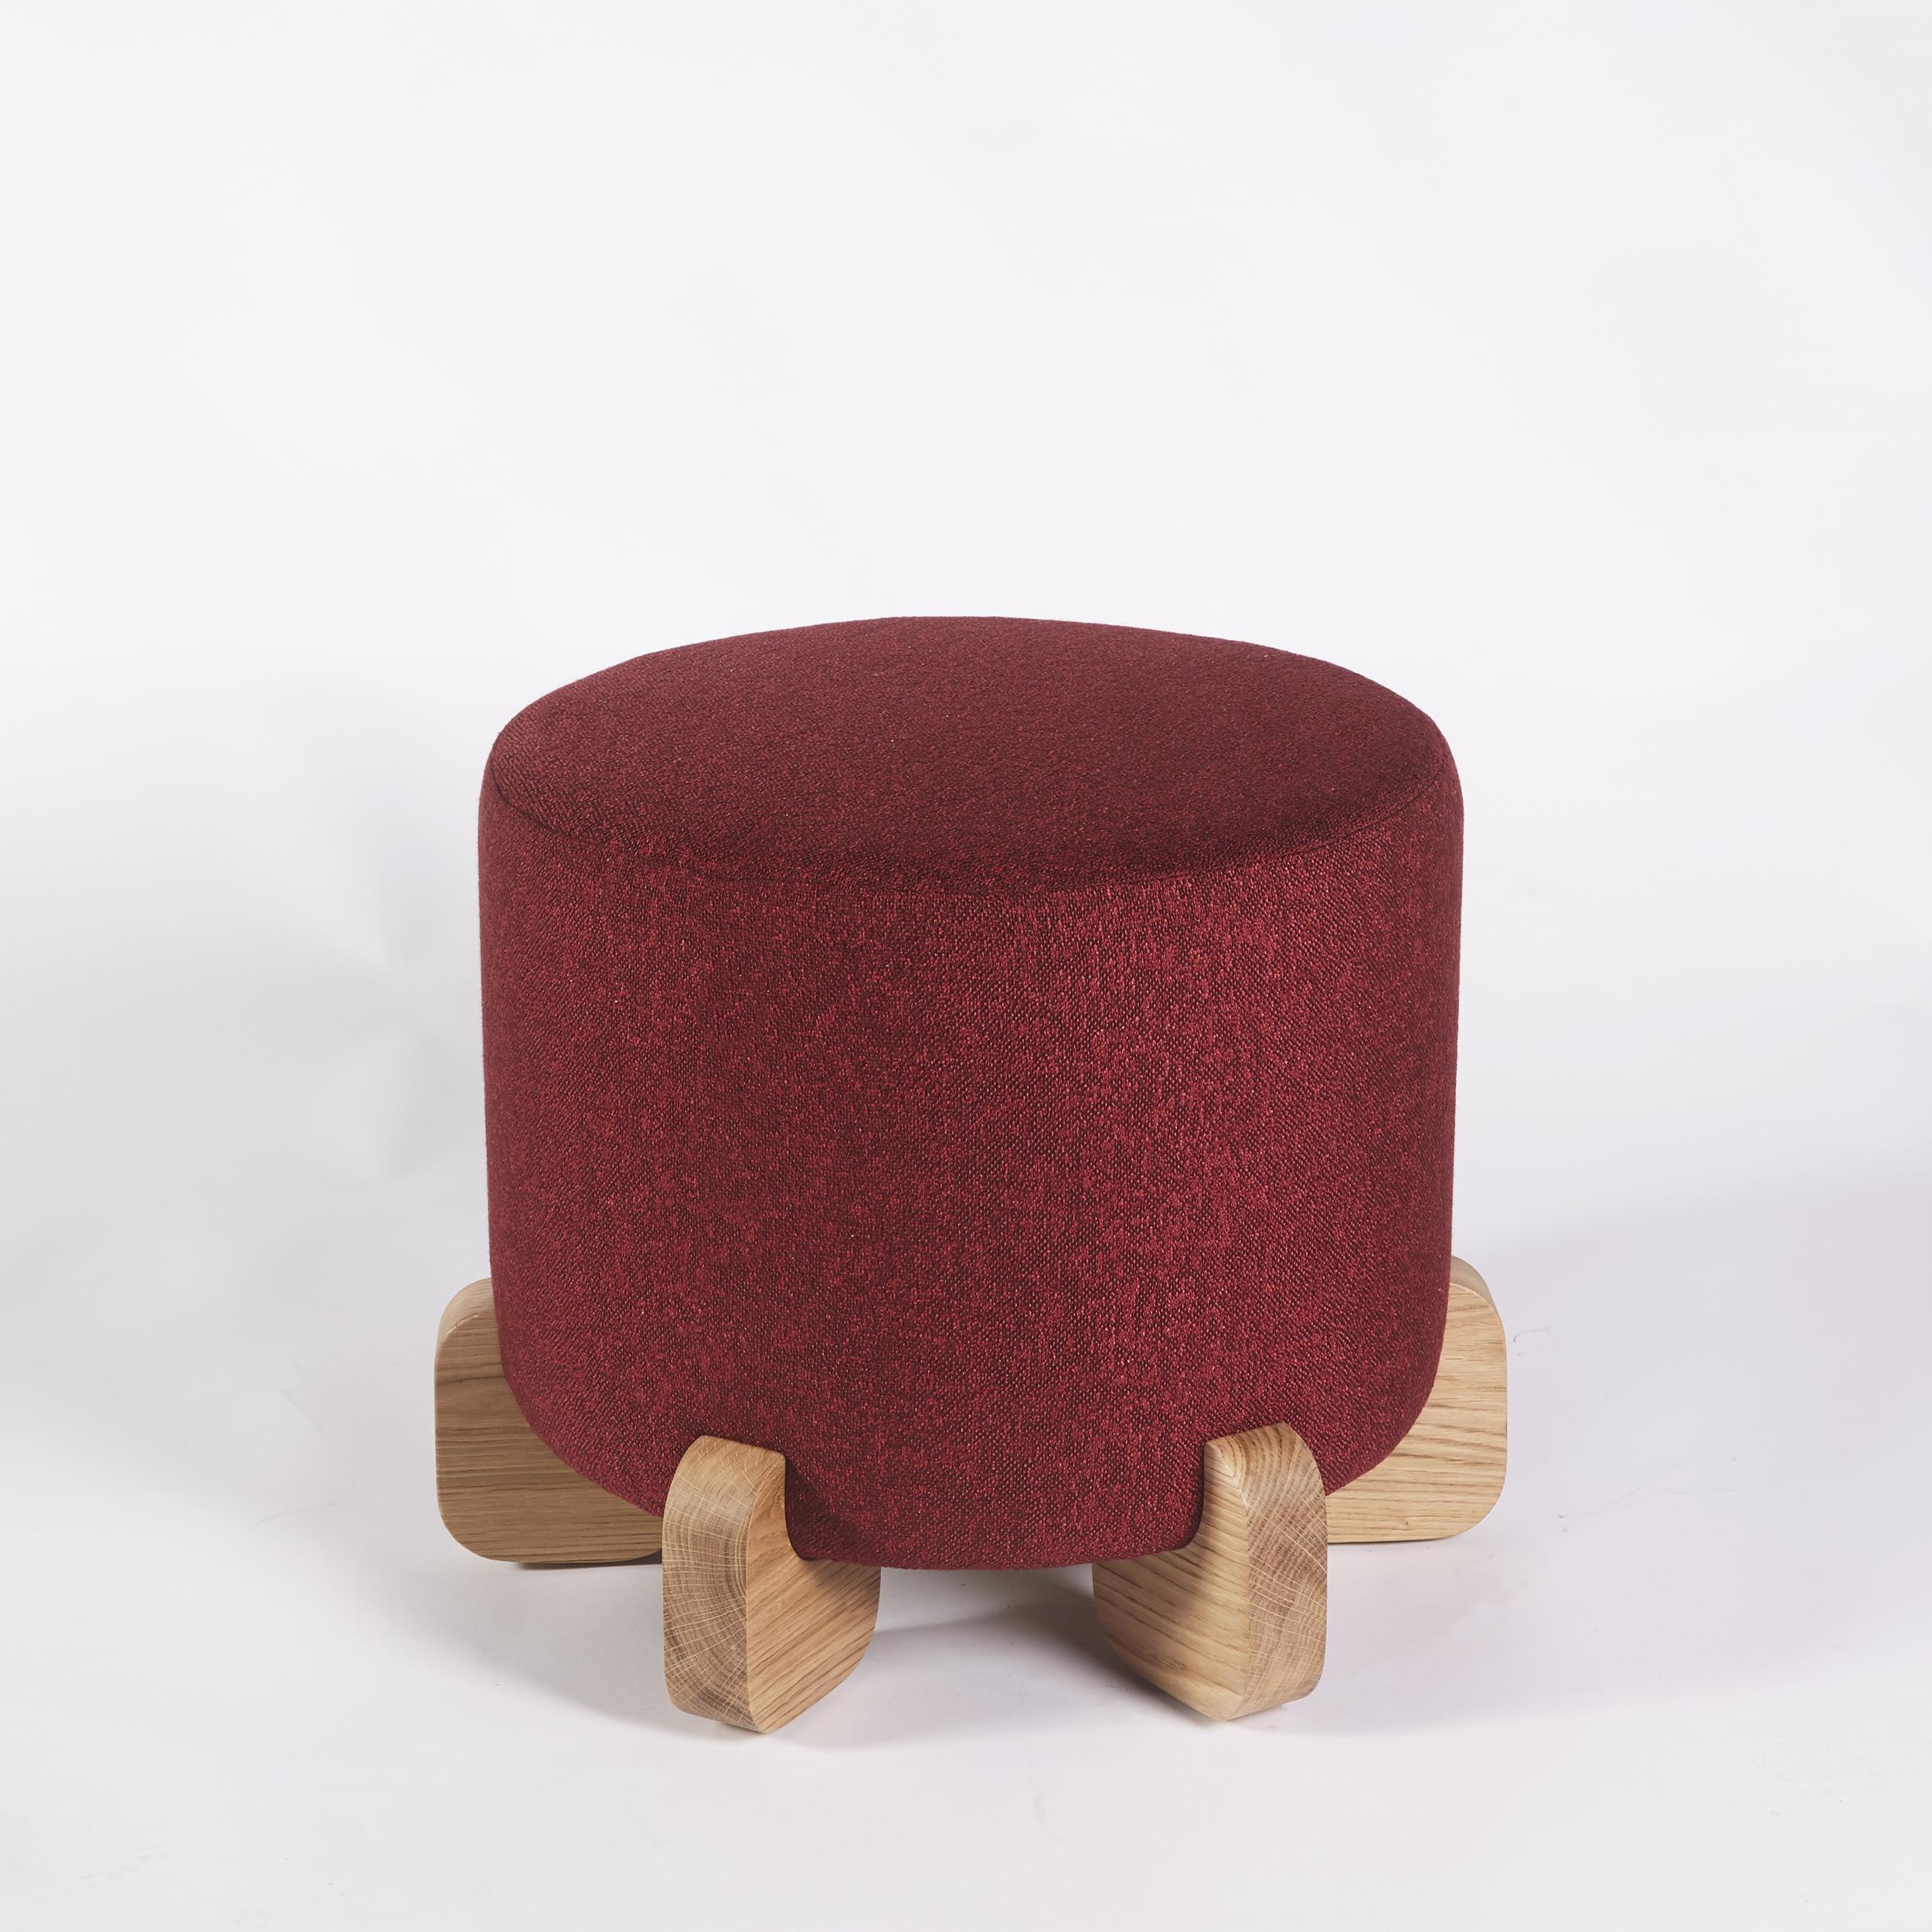 Ipanema Stool, Natural Oak Feet by Duistt

Following the Ipanema series that refers to the imagination of the well-known sidewalk in Rio de Janeiro. The Ipanema Stools, come in two versions upholstered in a deep red woven fabric, but with two